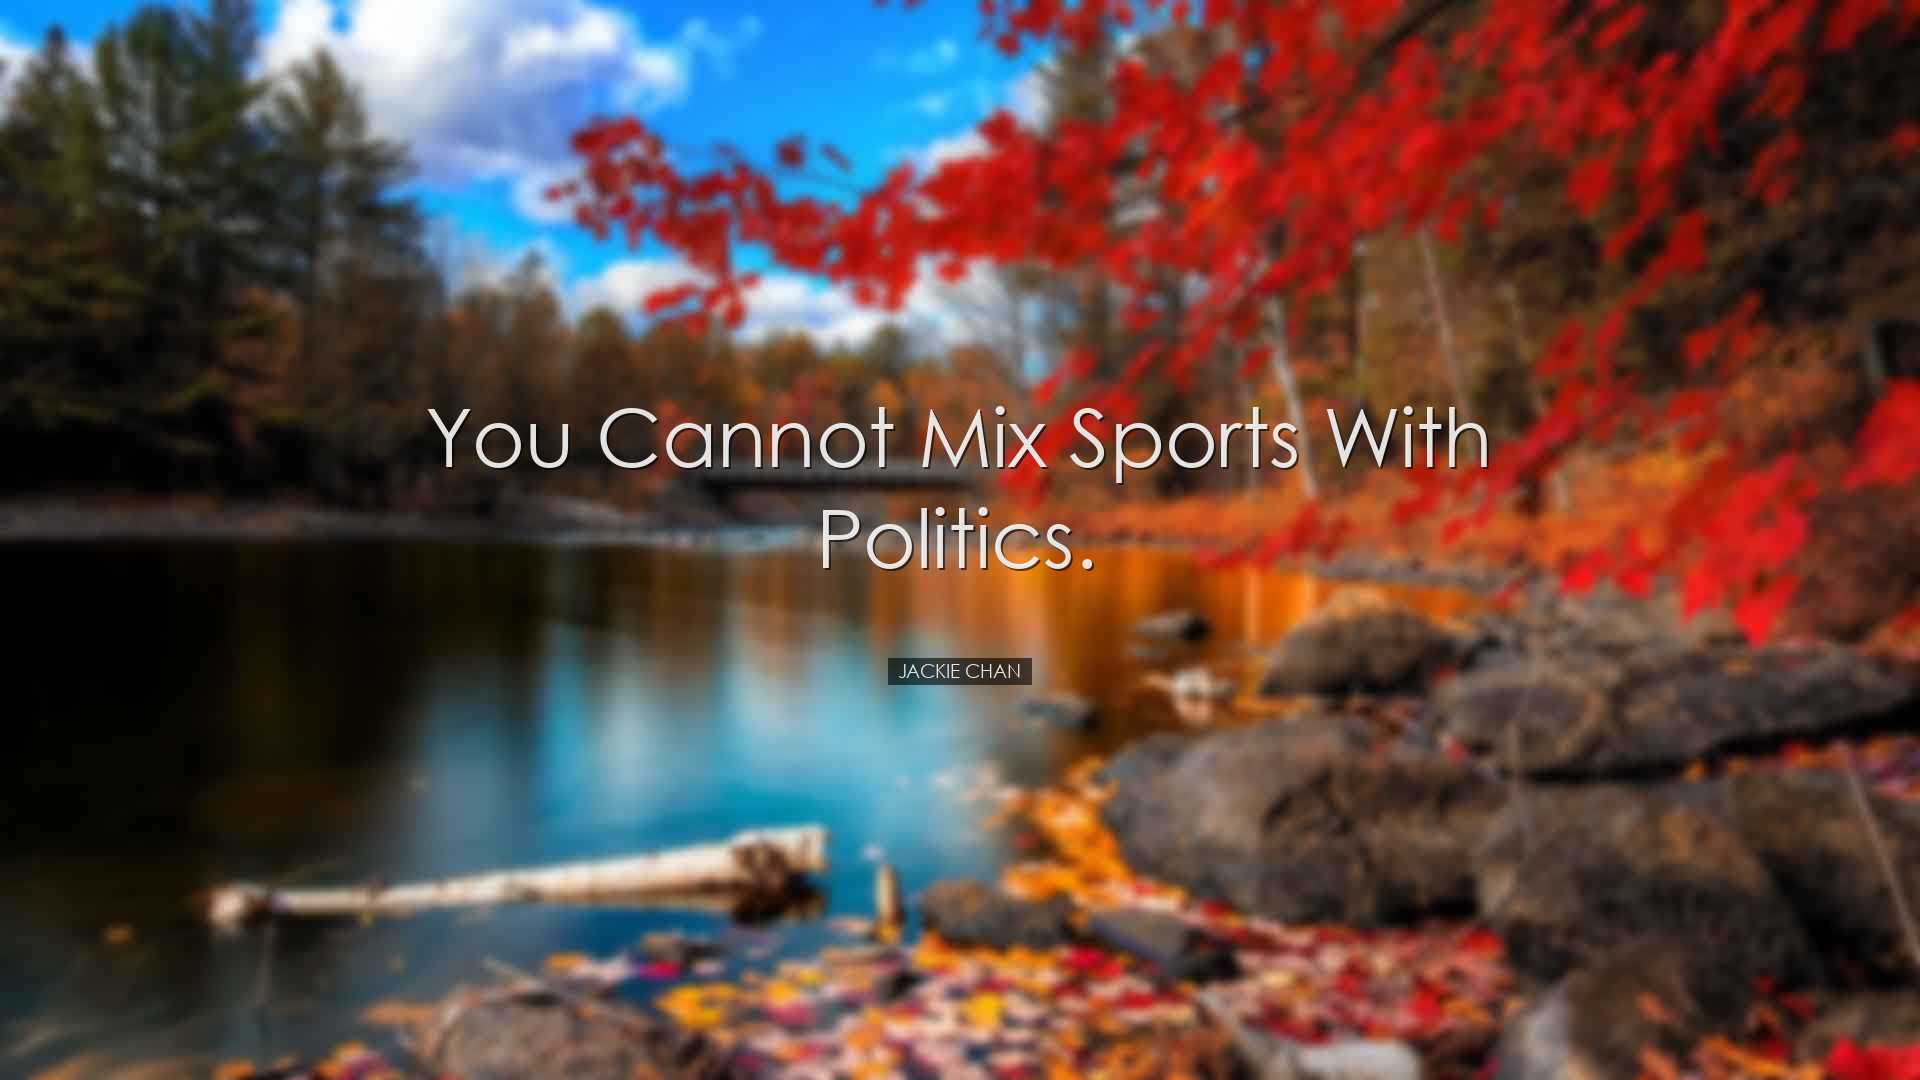 You cannot mix sports with politics. - Jackie Chan